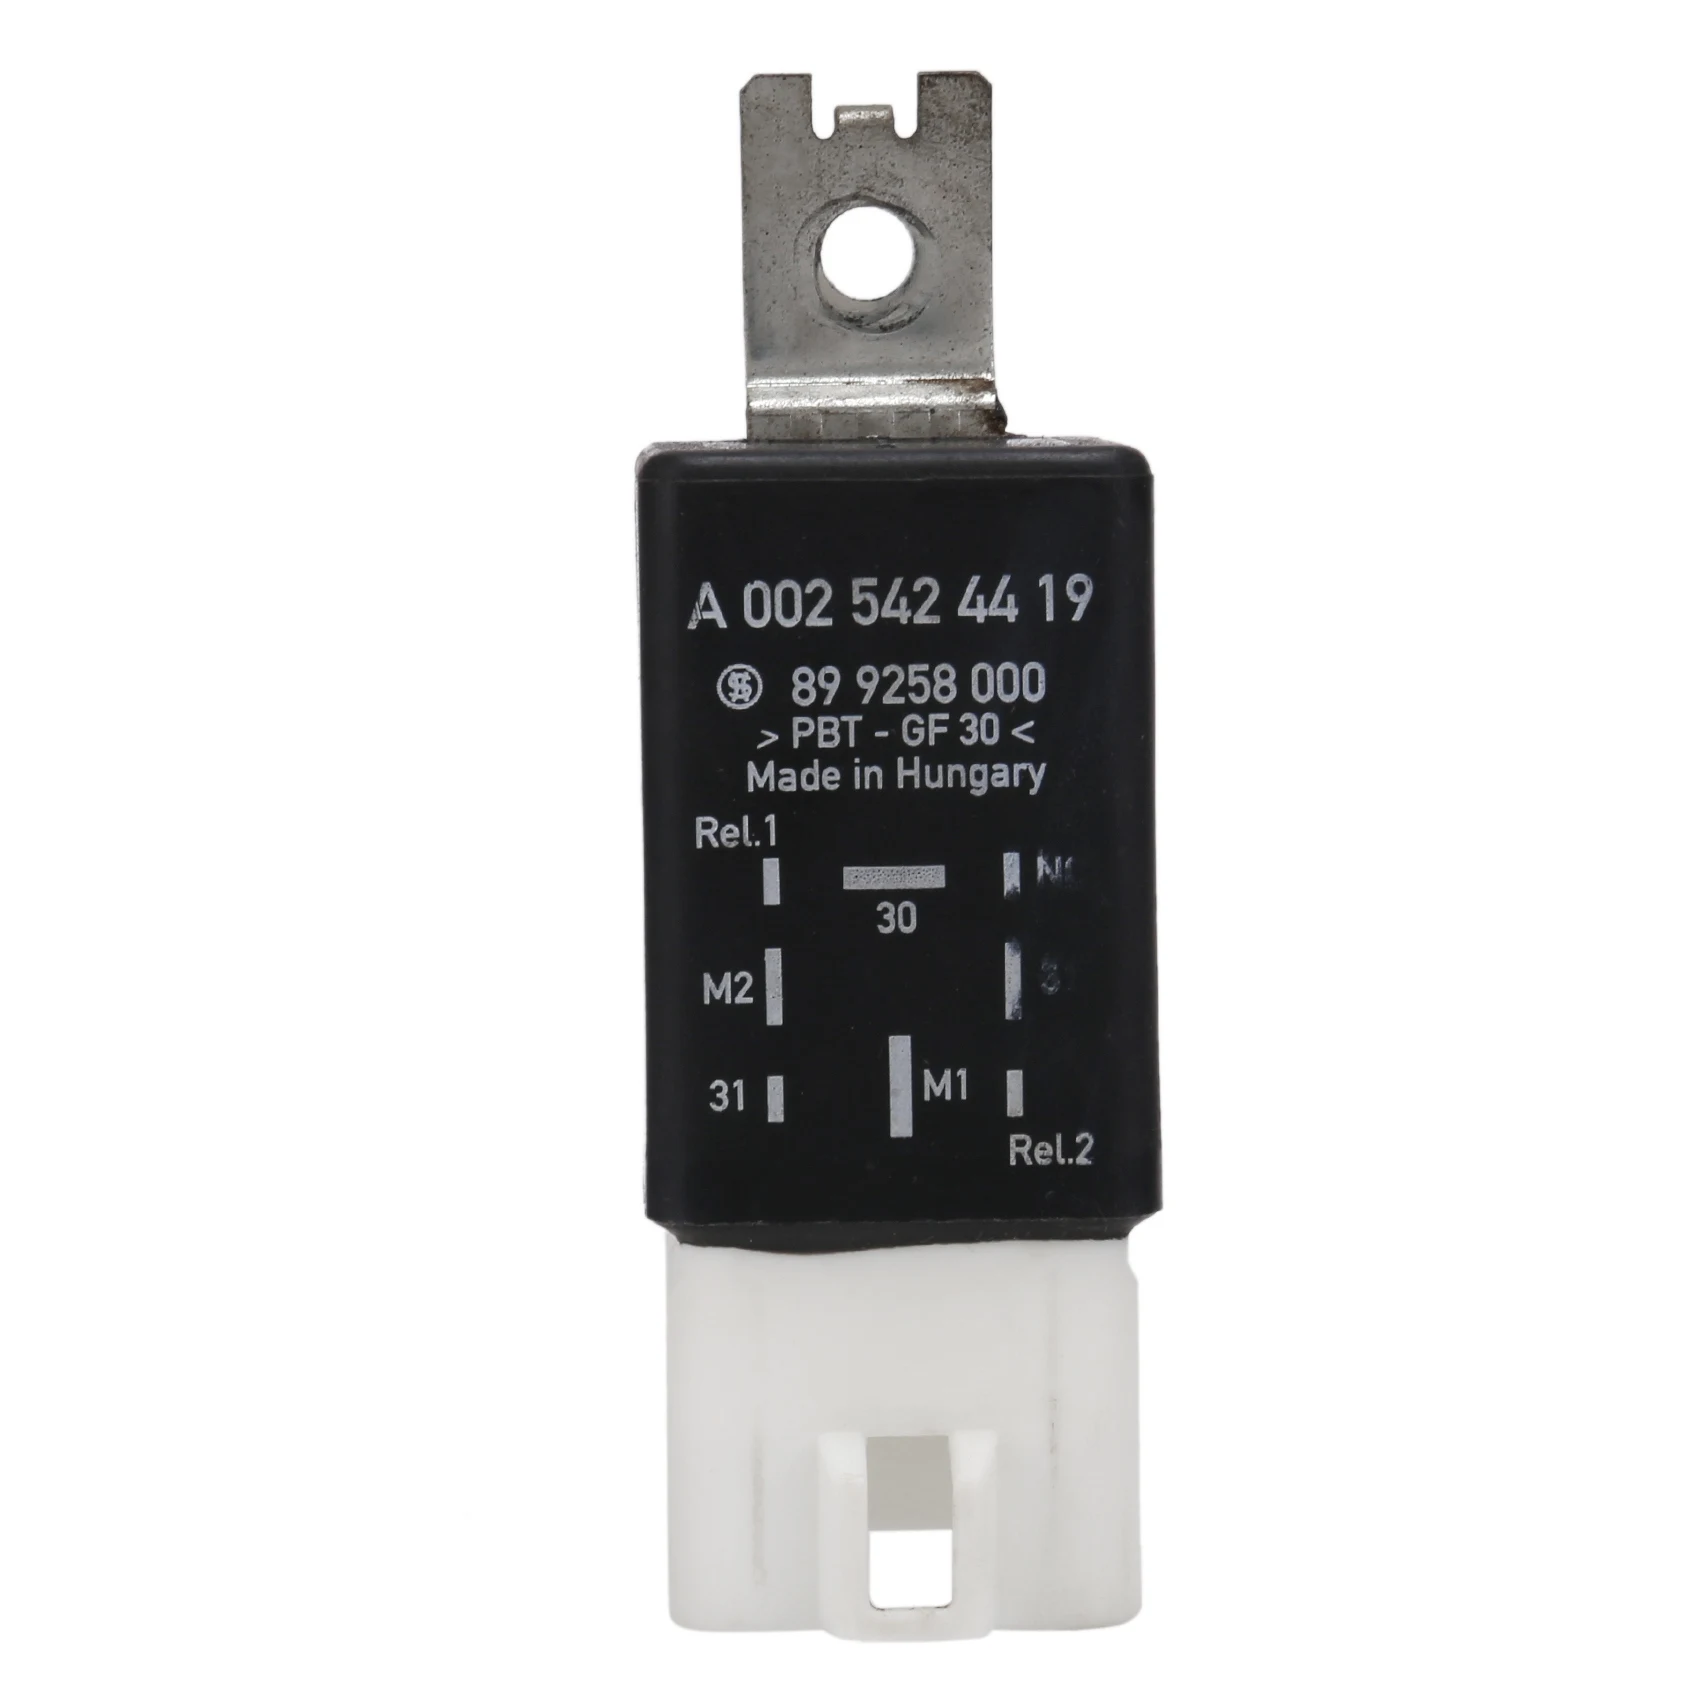 

Car Fan Resistance Electronic Car Relay for Mercedes-Benz Viano Vito V260L 0025424419 A0025424419